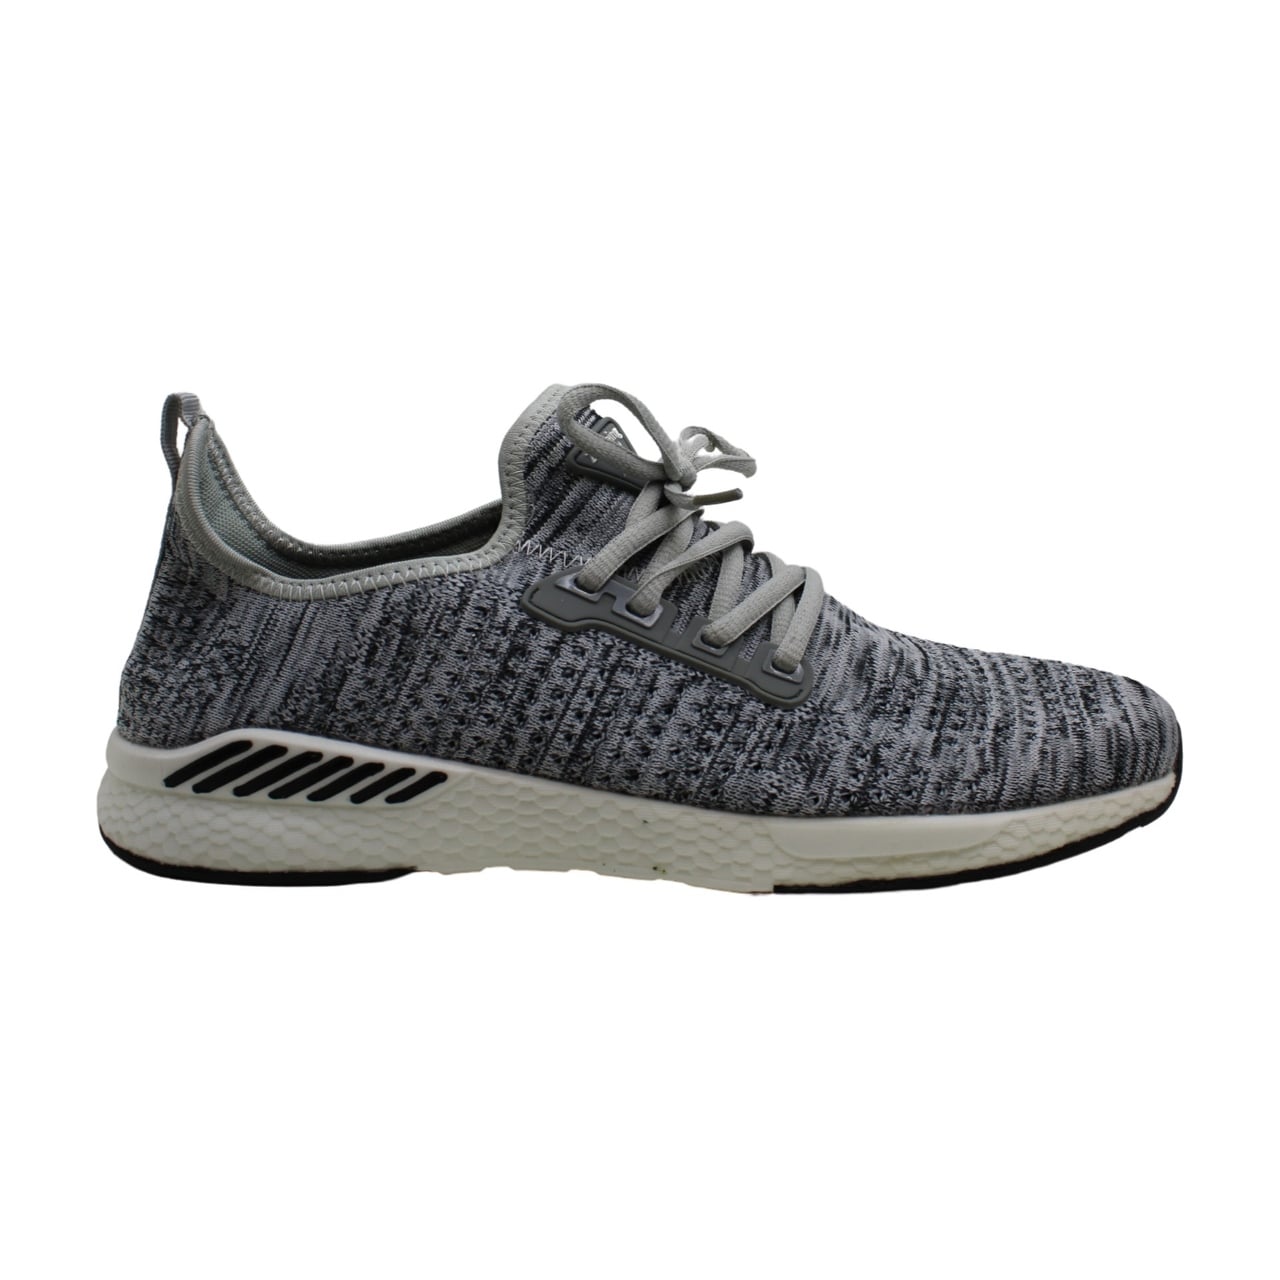 mesh breathable running shoes